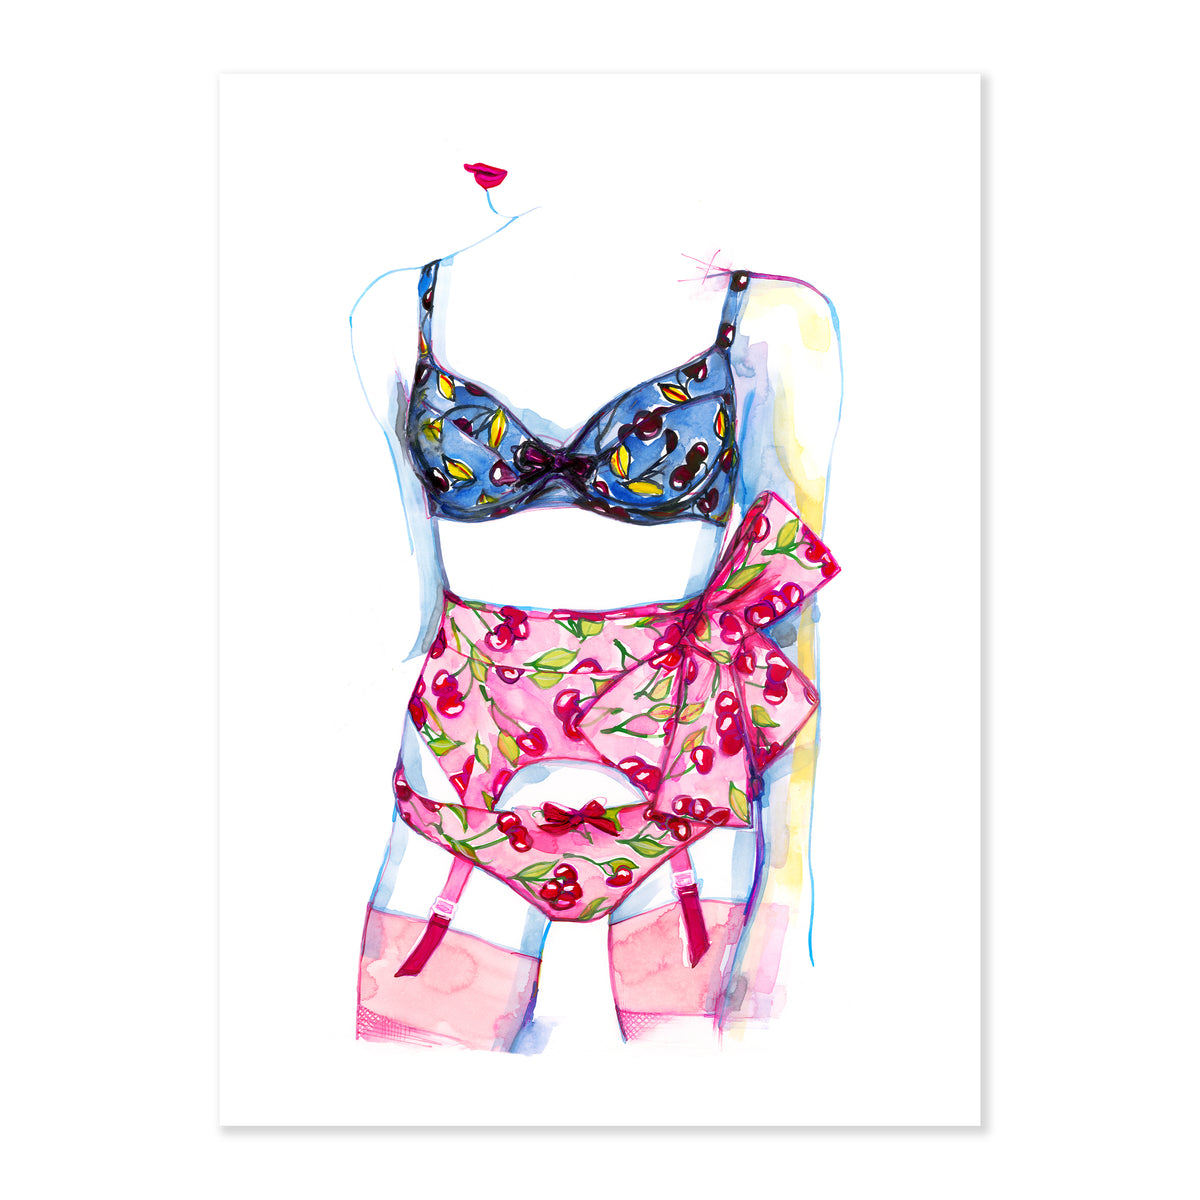 A fine art print illustrating a woman's silhouette wearing a lingerie set with blue bra and pink underwear and suspenders featuring a cherry design painted with watercolor on a soft white background